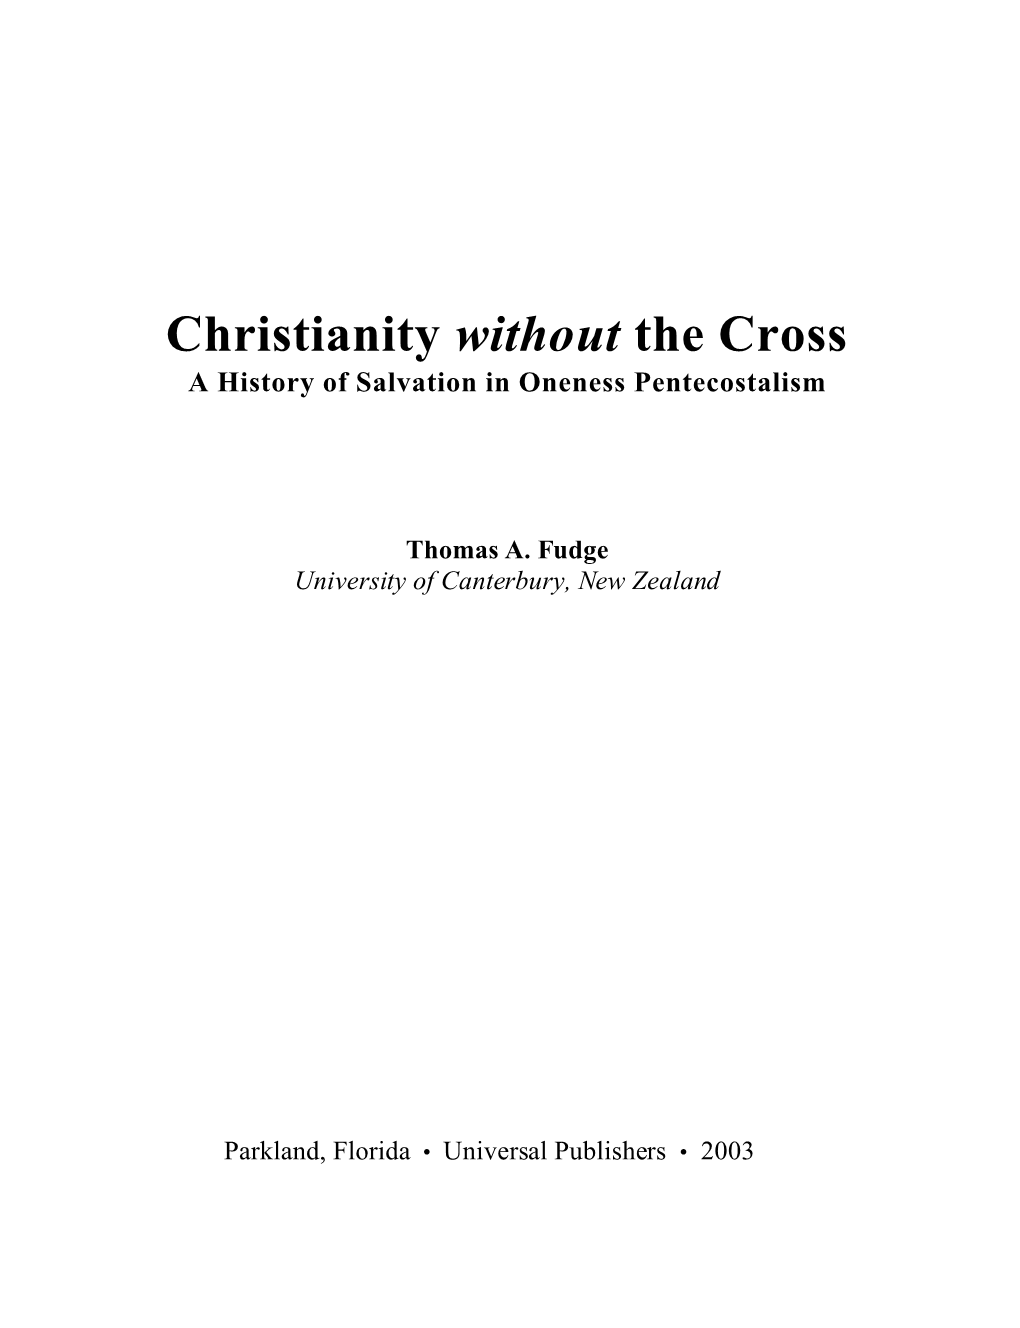 Christianity Without the Cross a History of Salvation in Oneness Pentecostalism